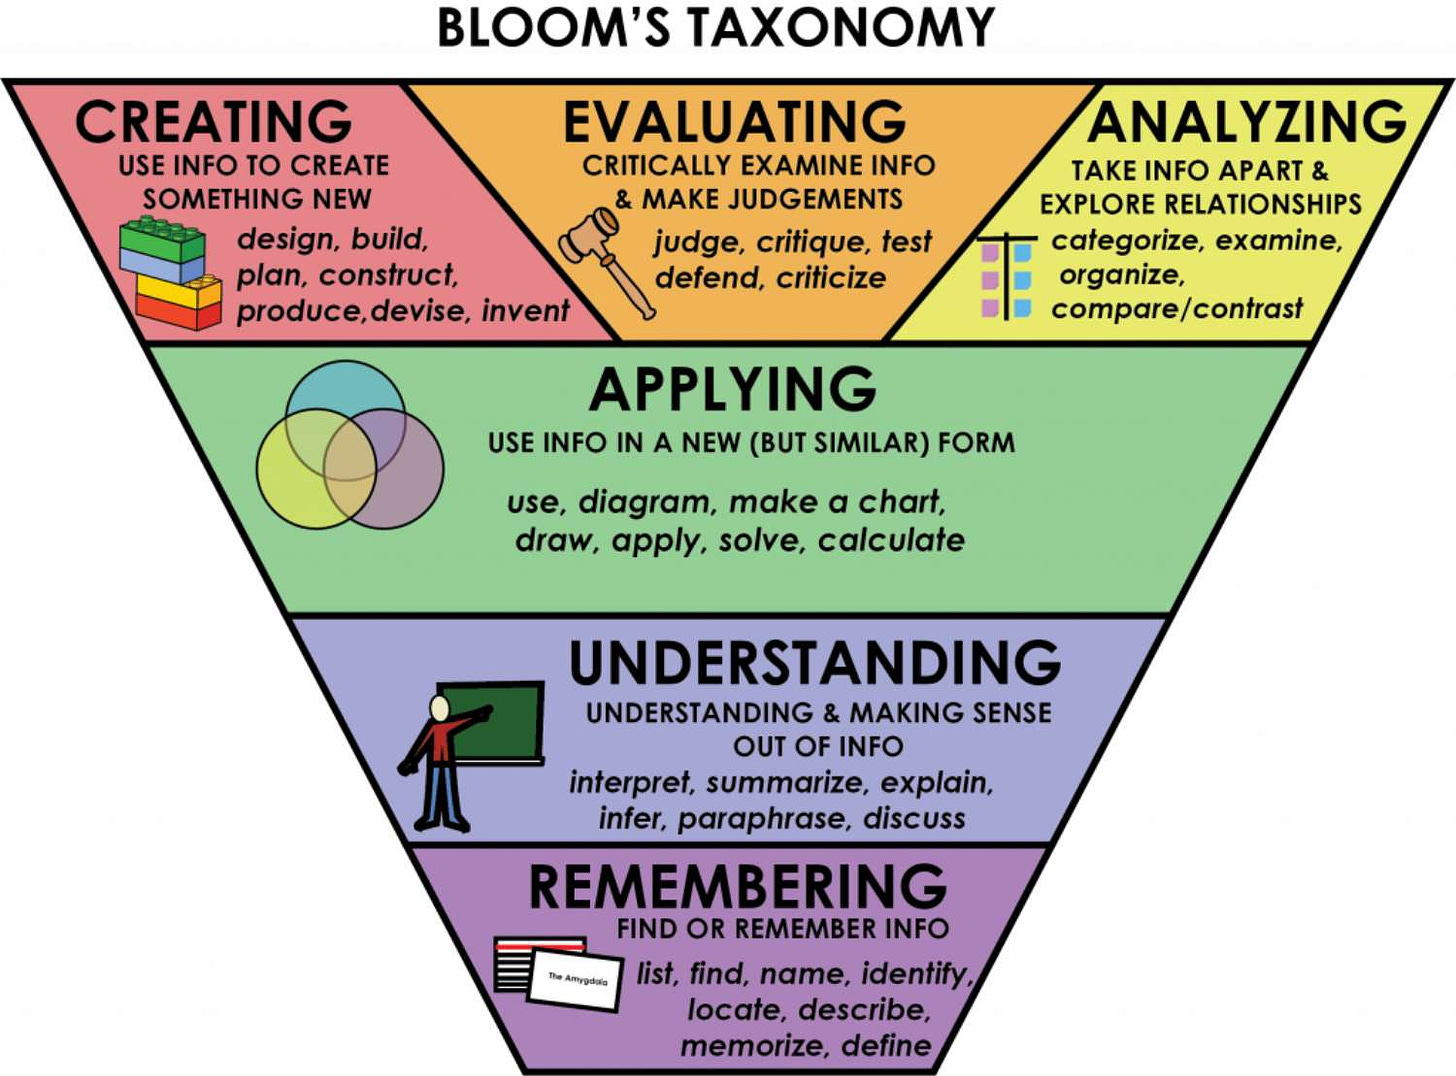 Picturing deeper learning with Bloom’s Taxonomy